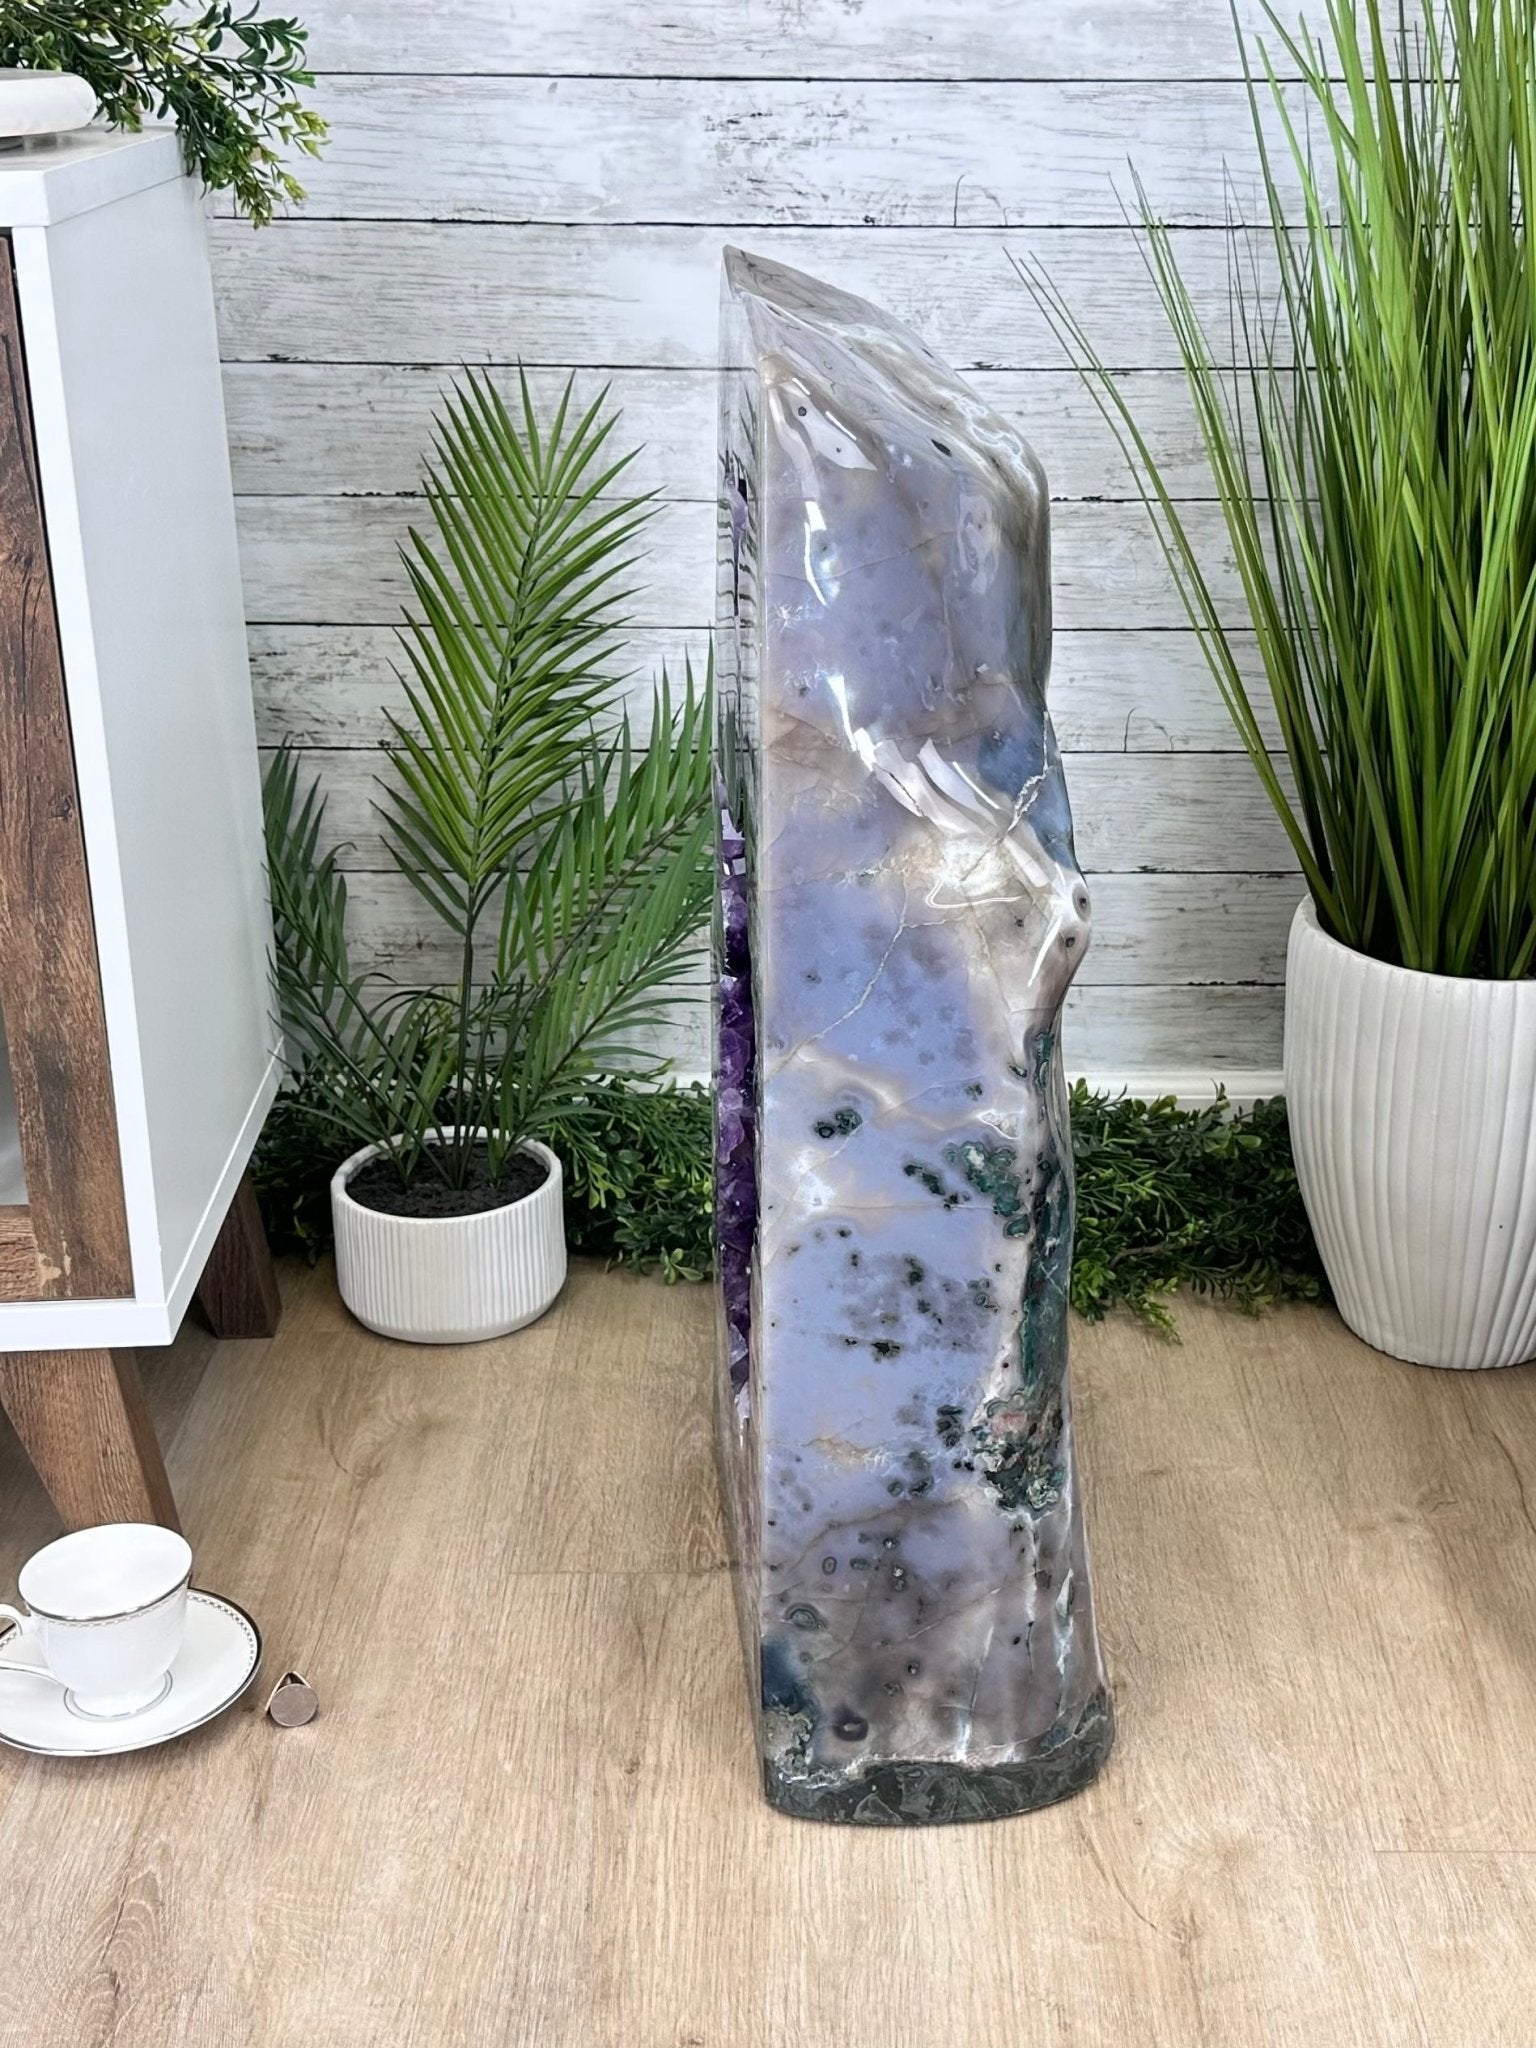 Super Quality Polished Brazilian Amethyst Cathedral, 184.3 lbs & 29.3" tall Model #5602-0082 by Brazil Gems - Brazil GemsBrazil GemsSuper Quality Polished Brazilian Amethyst Cathedral, 184.3 lbs & 29.3" tall Model #5602-0082 by Brazil GemsPolished Cathedrals5602-0082